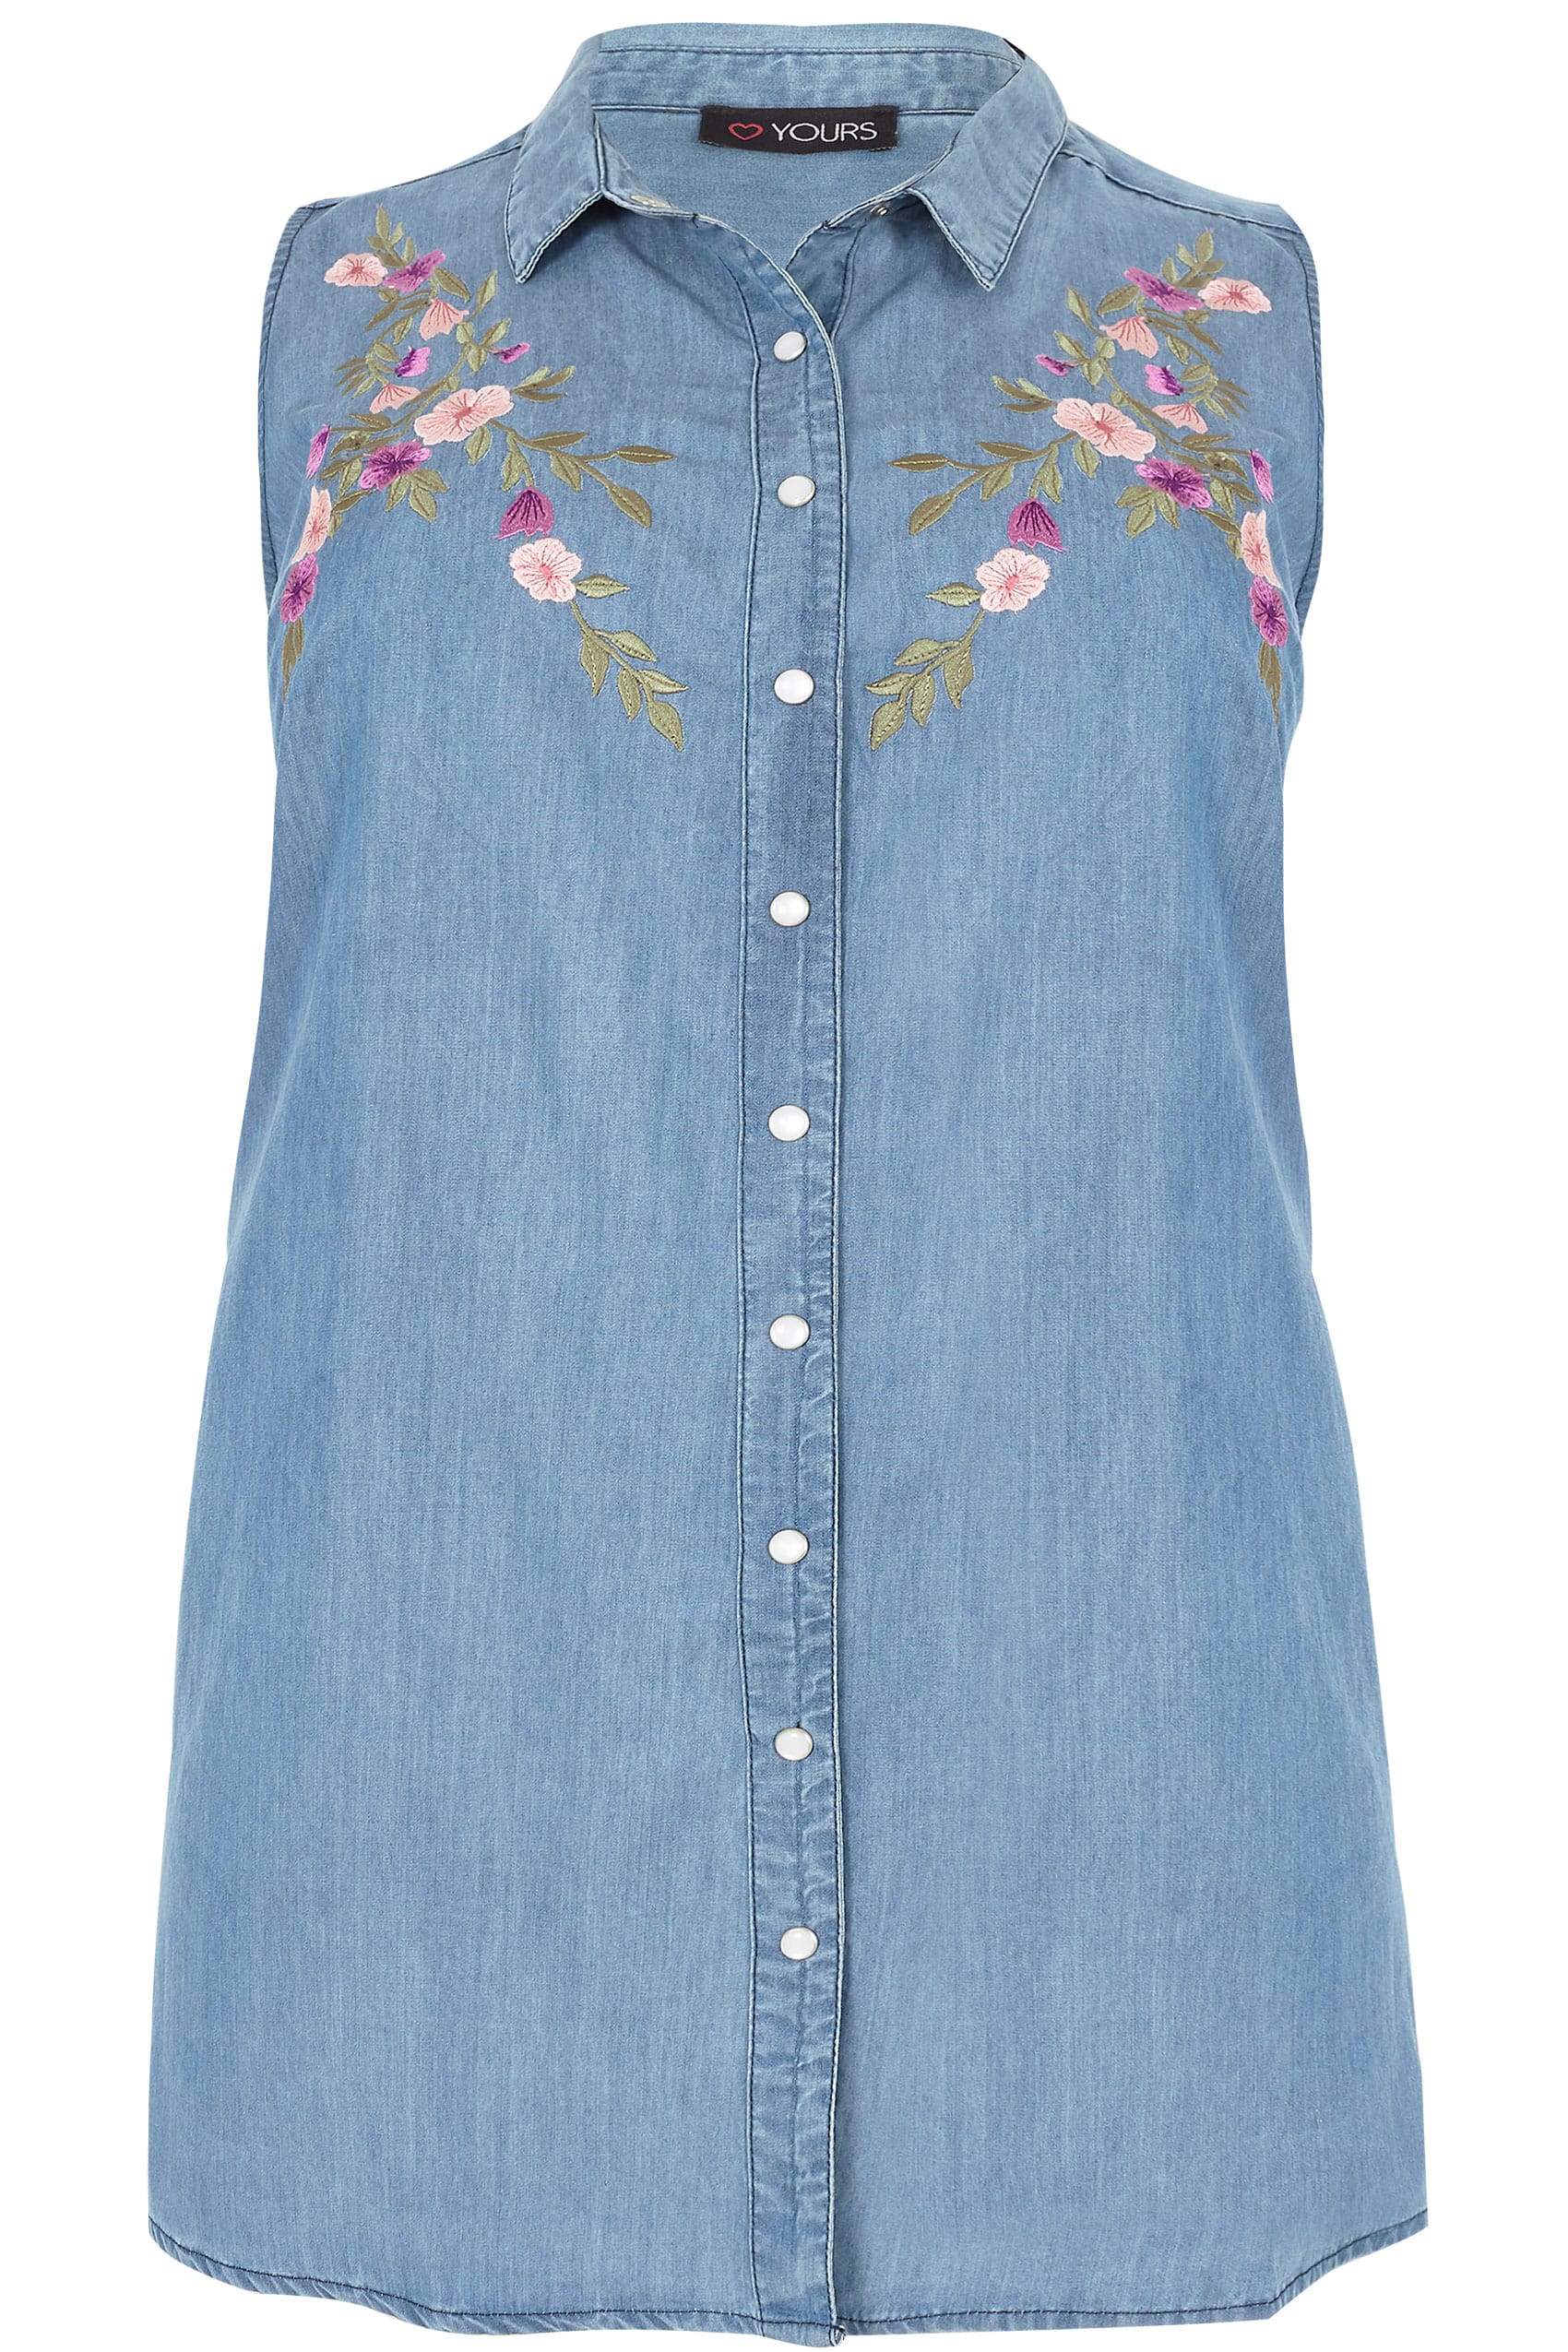 blue-floral-embroidery-sleeveless-denim-shirt-plus-size-16-to-36